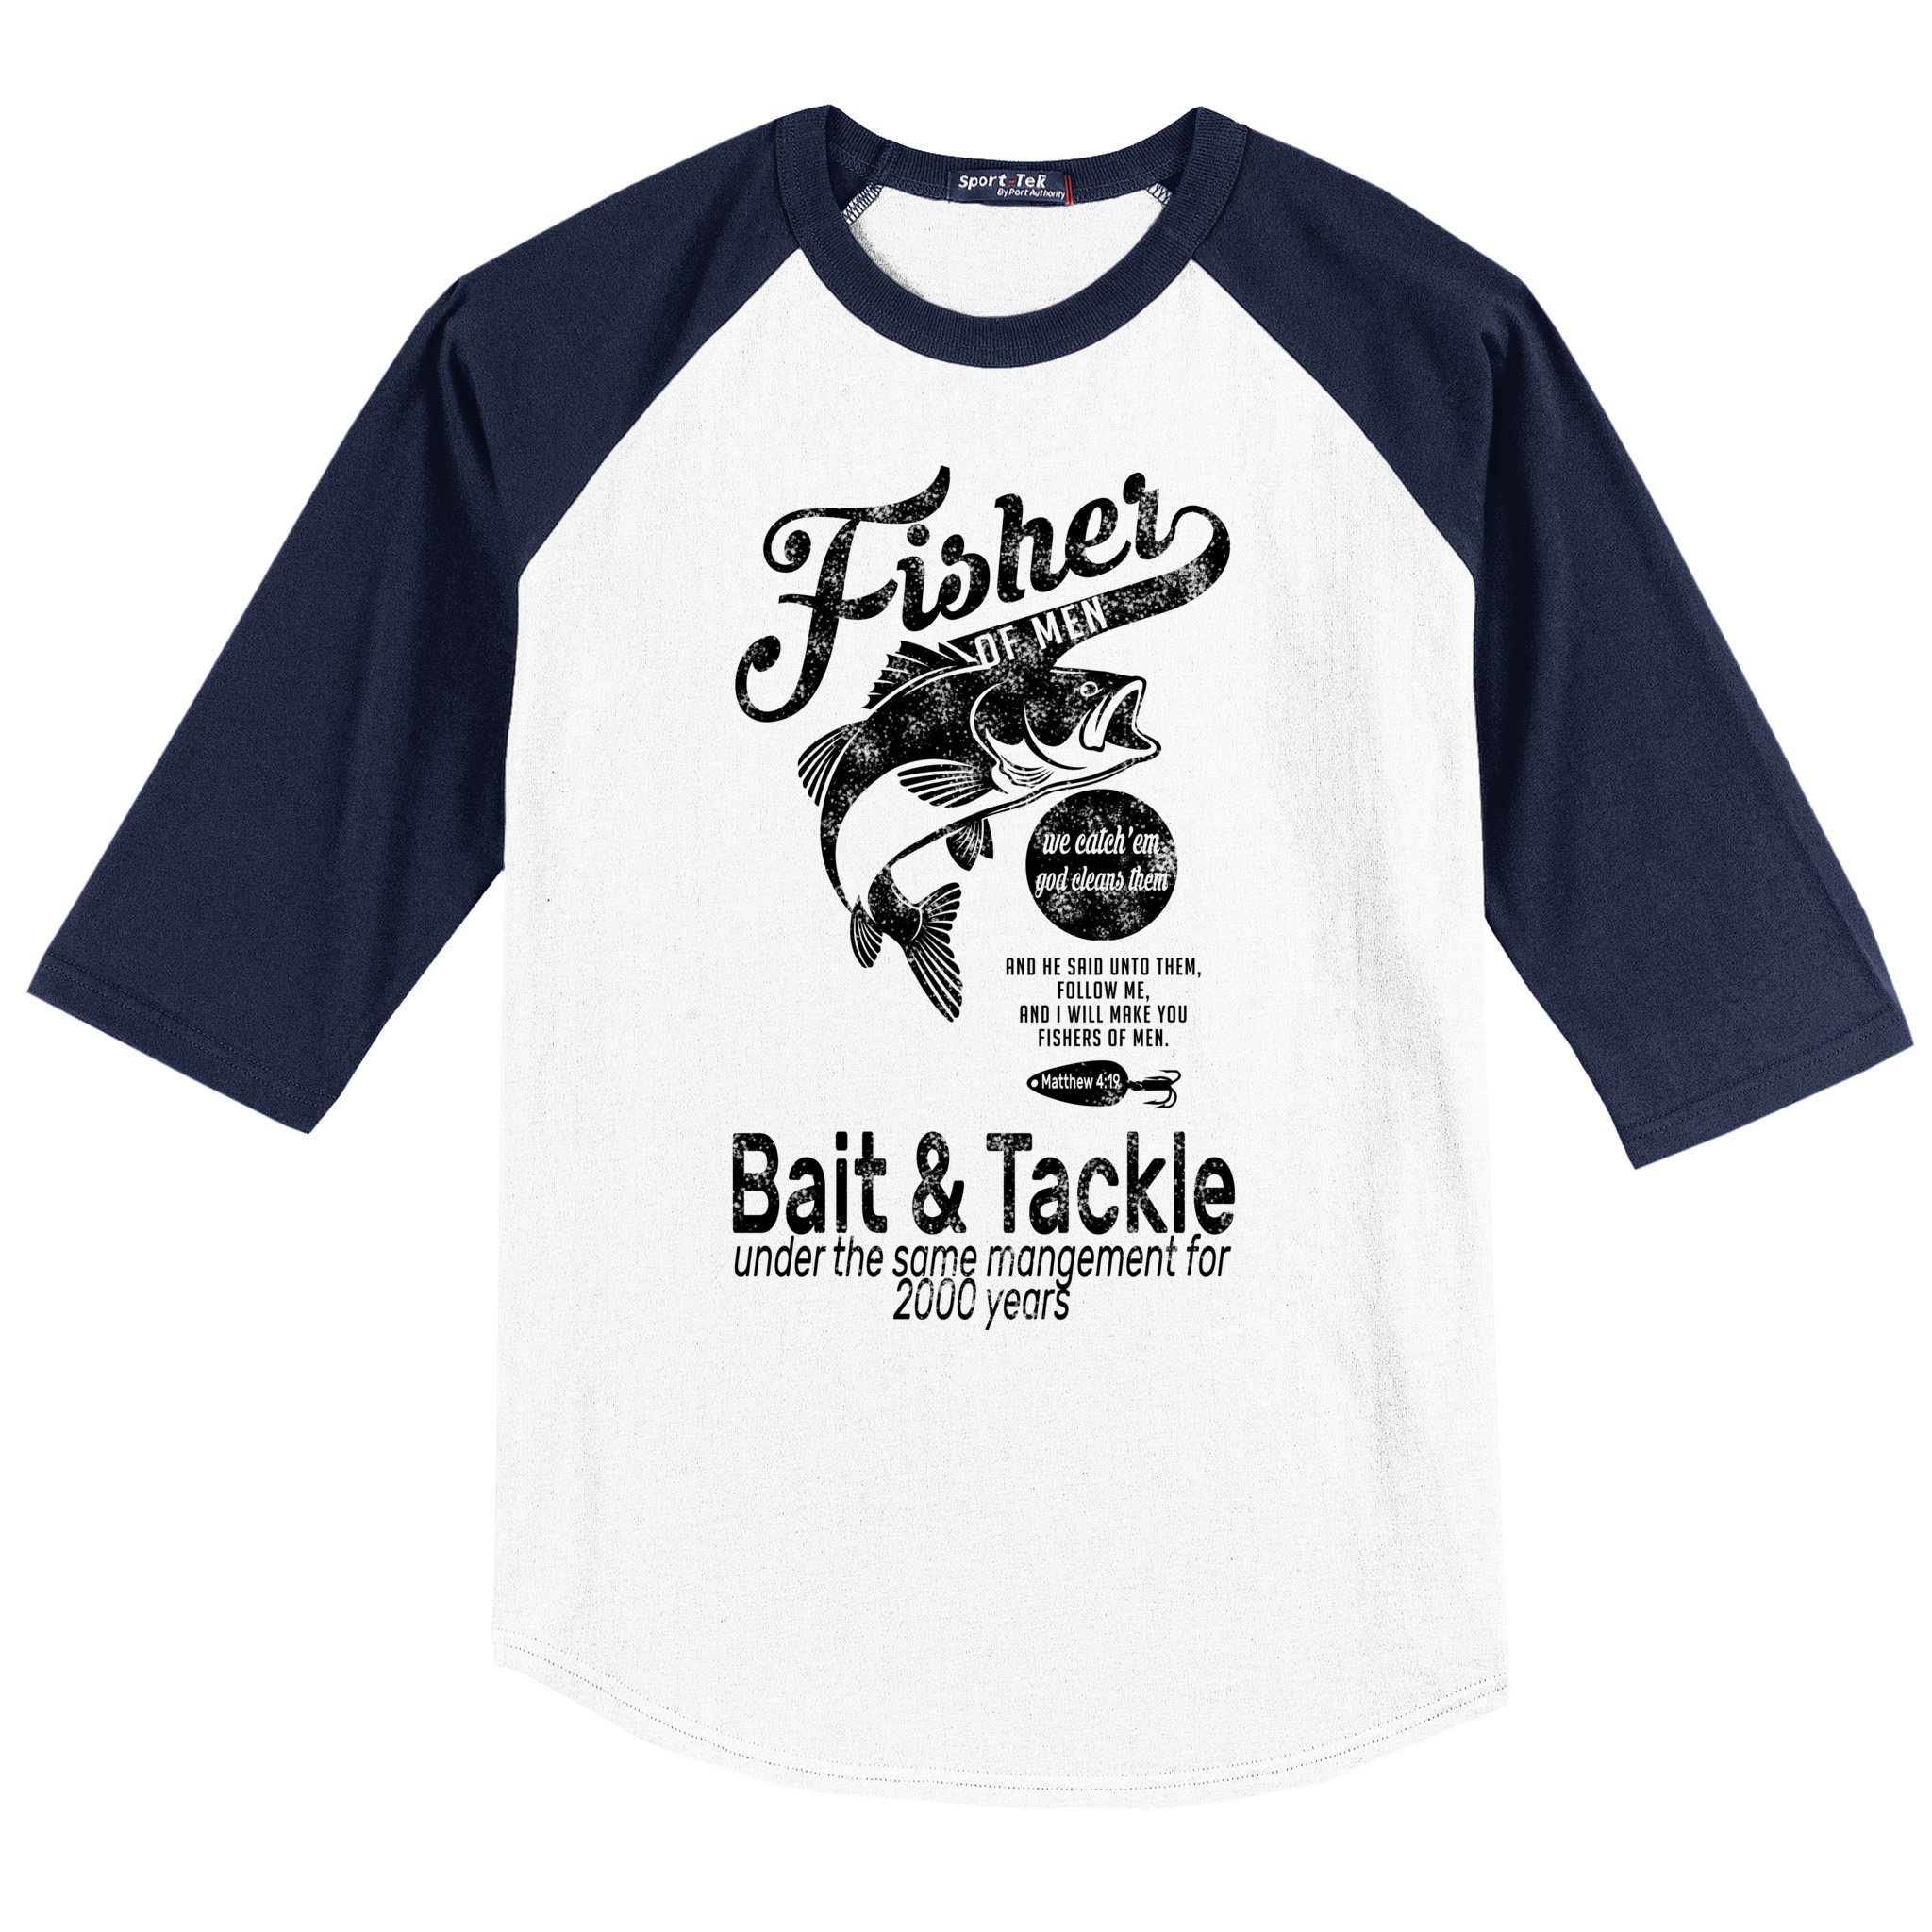 https://images3.teeshirtpalace.com/images/productImages/fisher-of-men--navy-rbs-garment.jpg